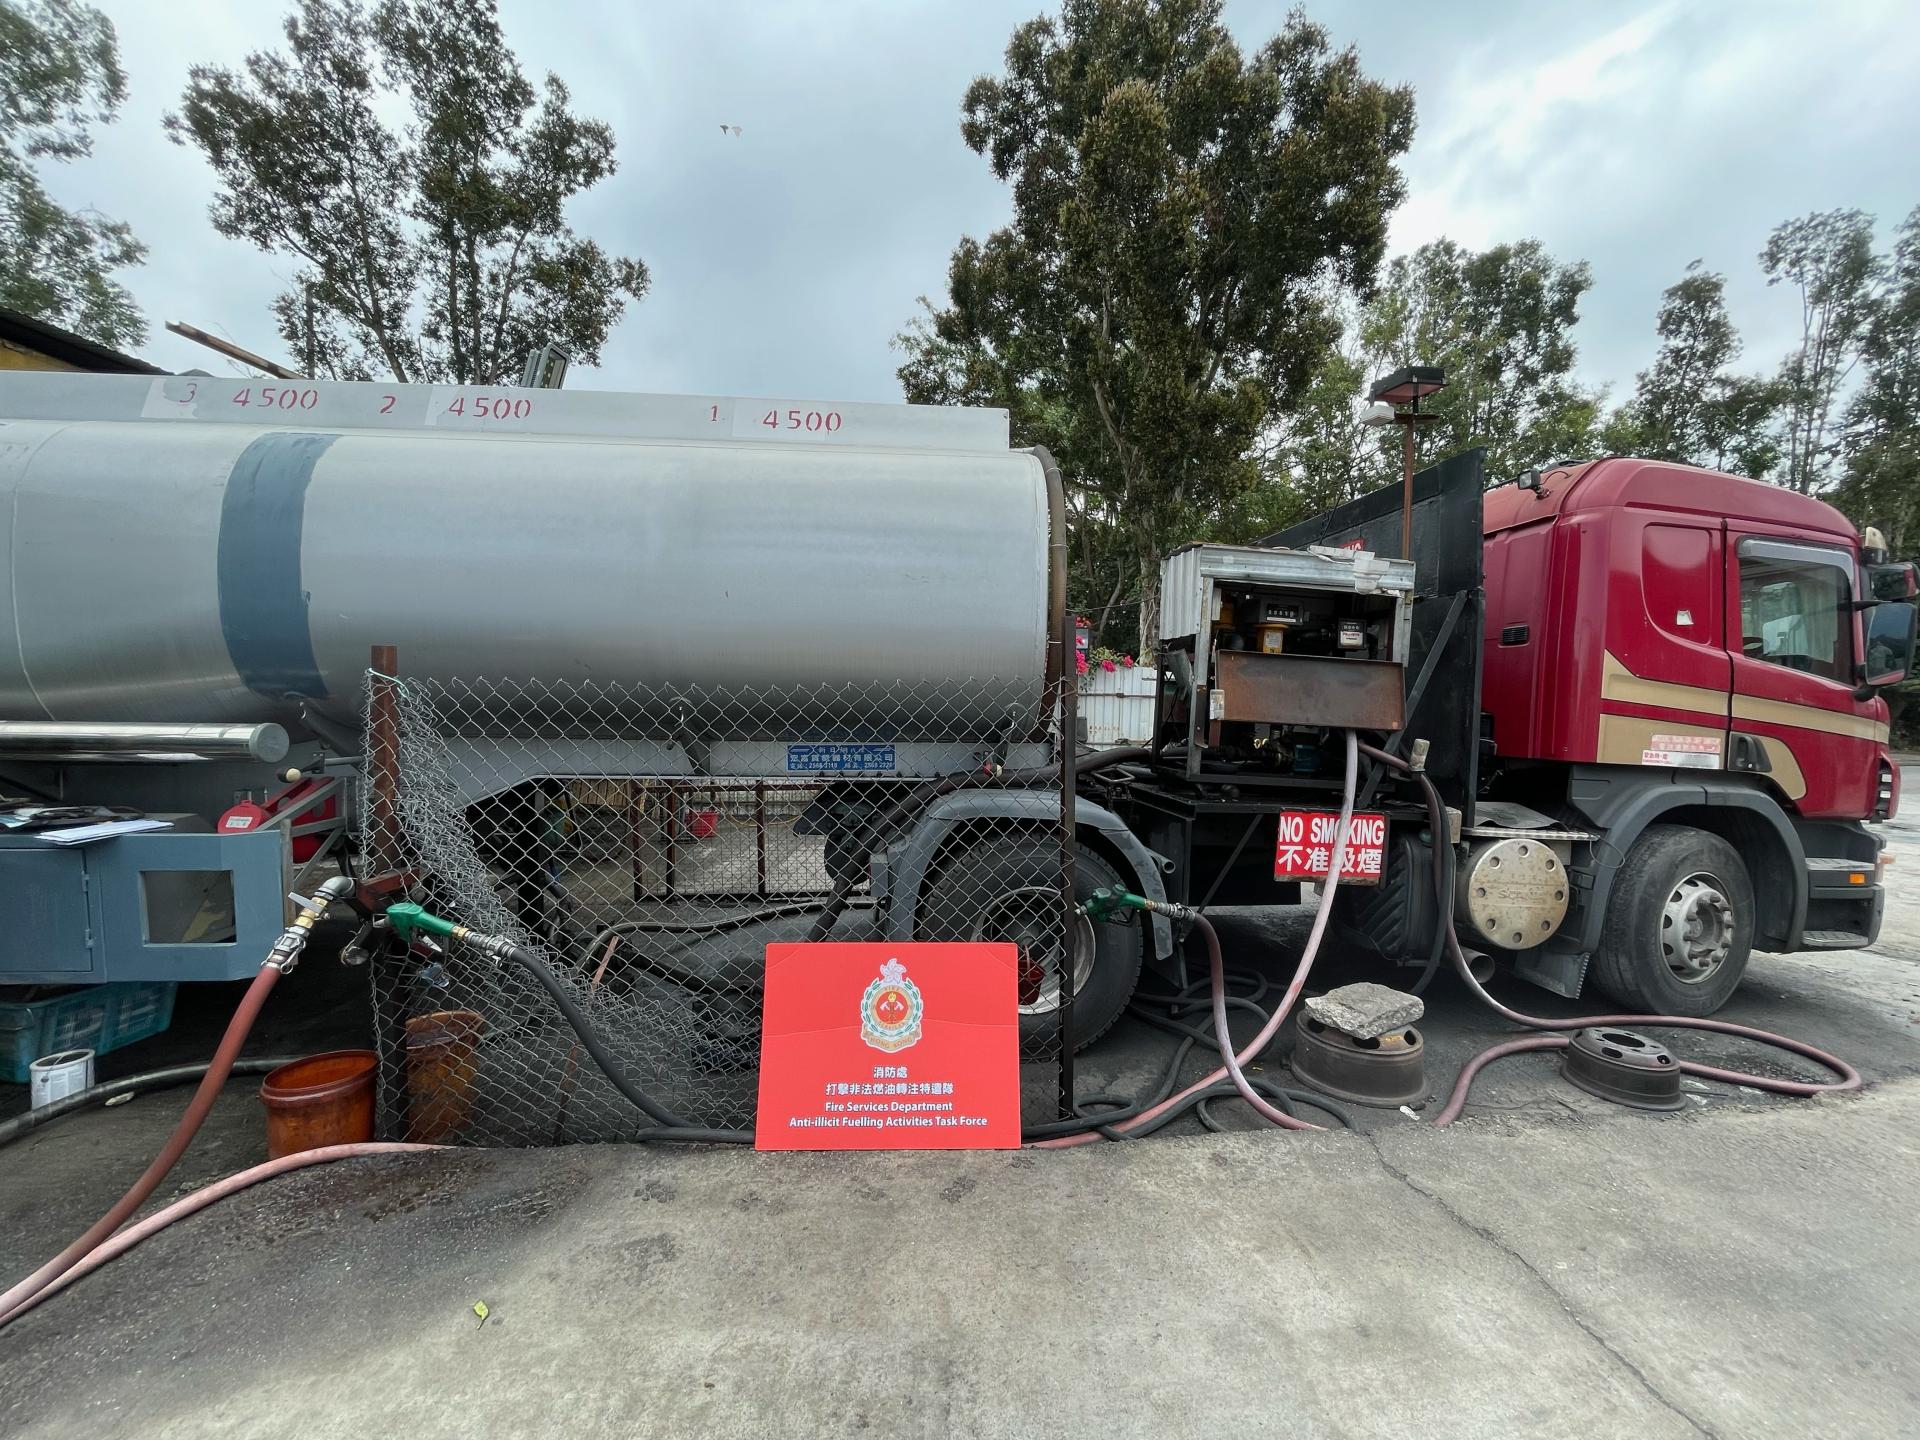 The Fire Services Department, the Hong Kong Police Force and Hong Kong Customs mounted a joint operation codenamed "Winter Thunder" to combat illicit fuelling activities today (January 26). Photo shows an oil tank wagon used for suspected illicit fuelling activities.